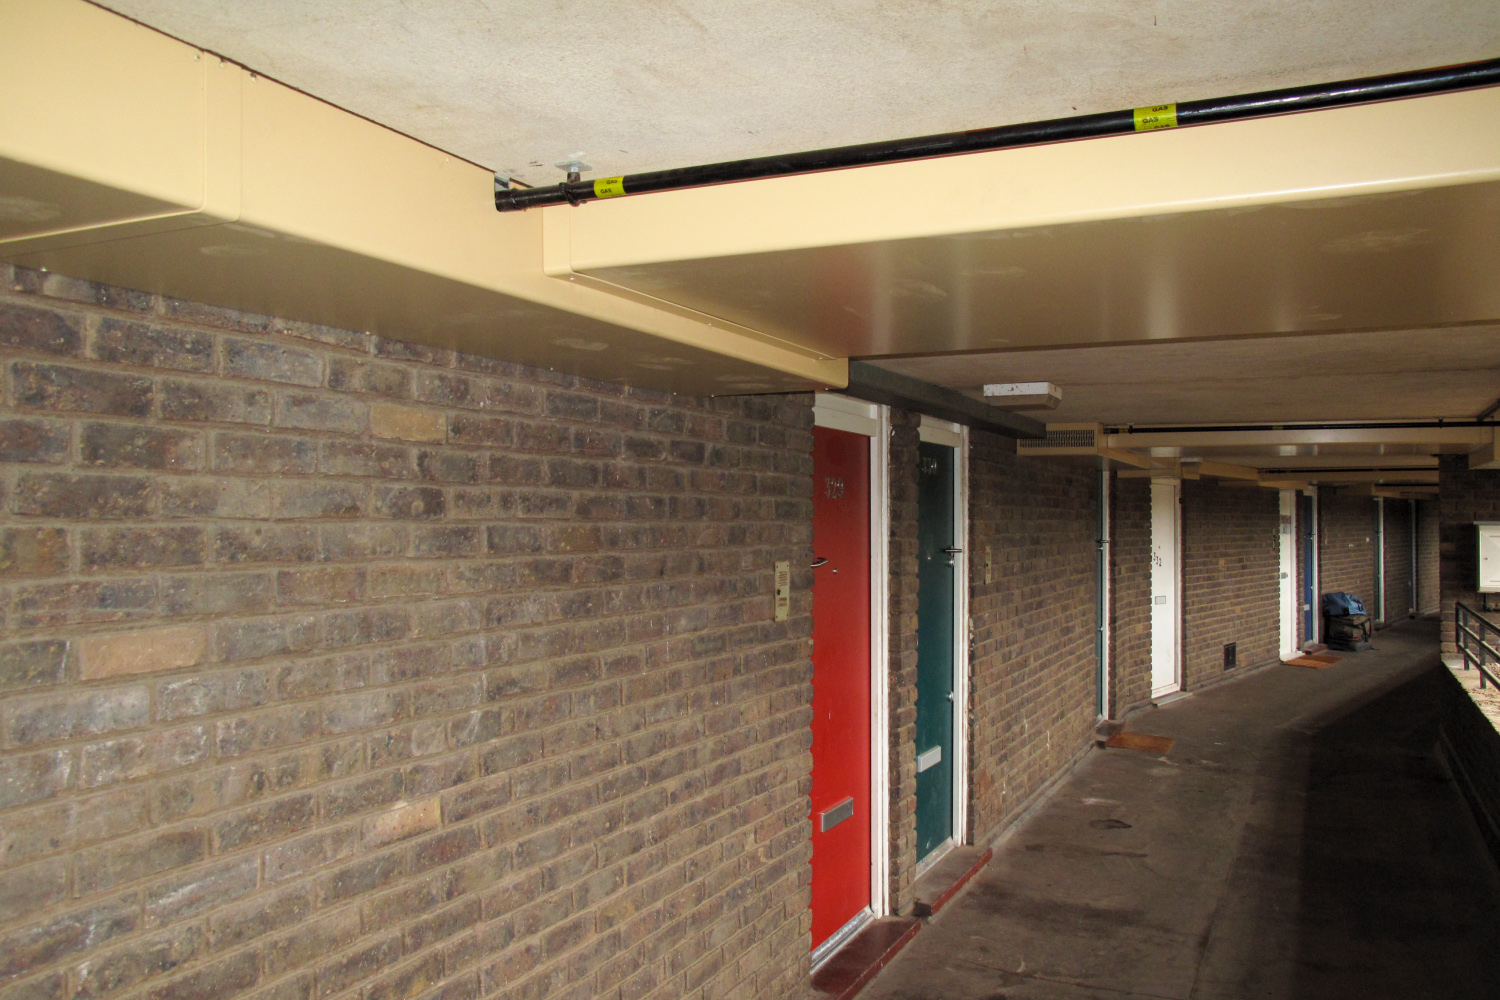 Arma protects external heating pipework at Brixton’s Southwyck House